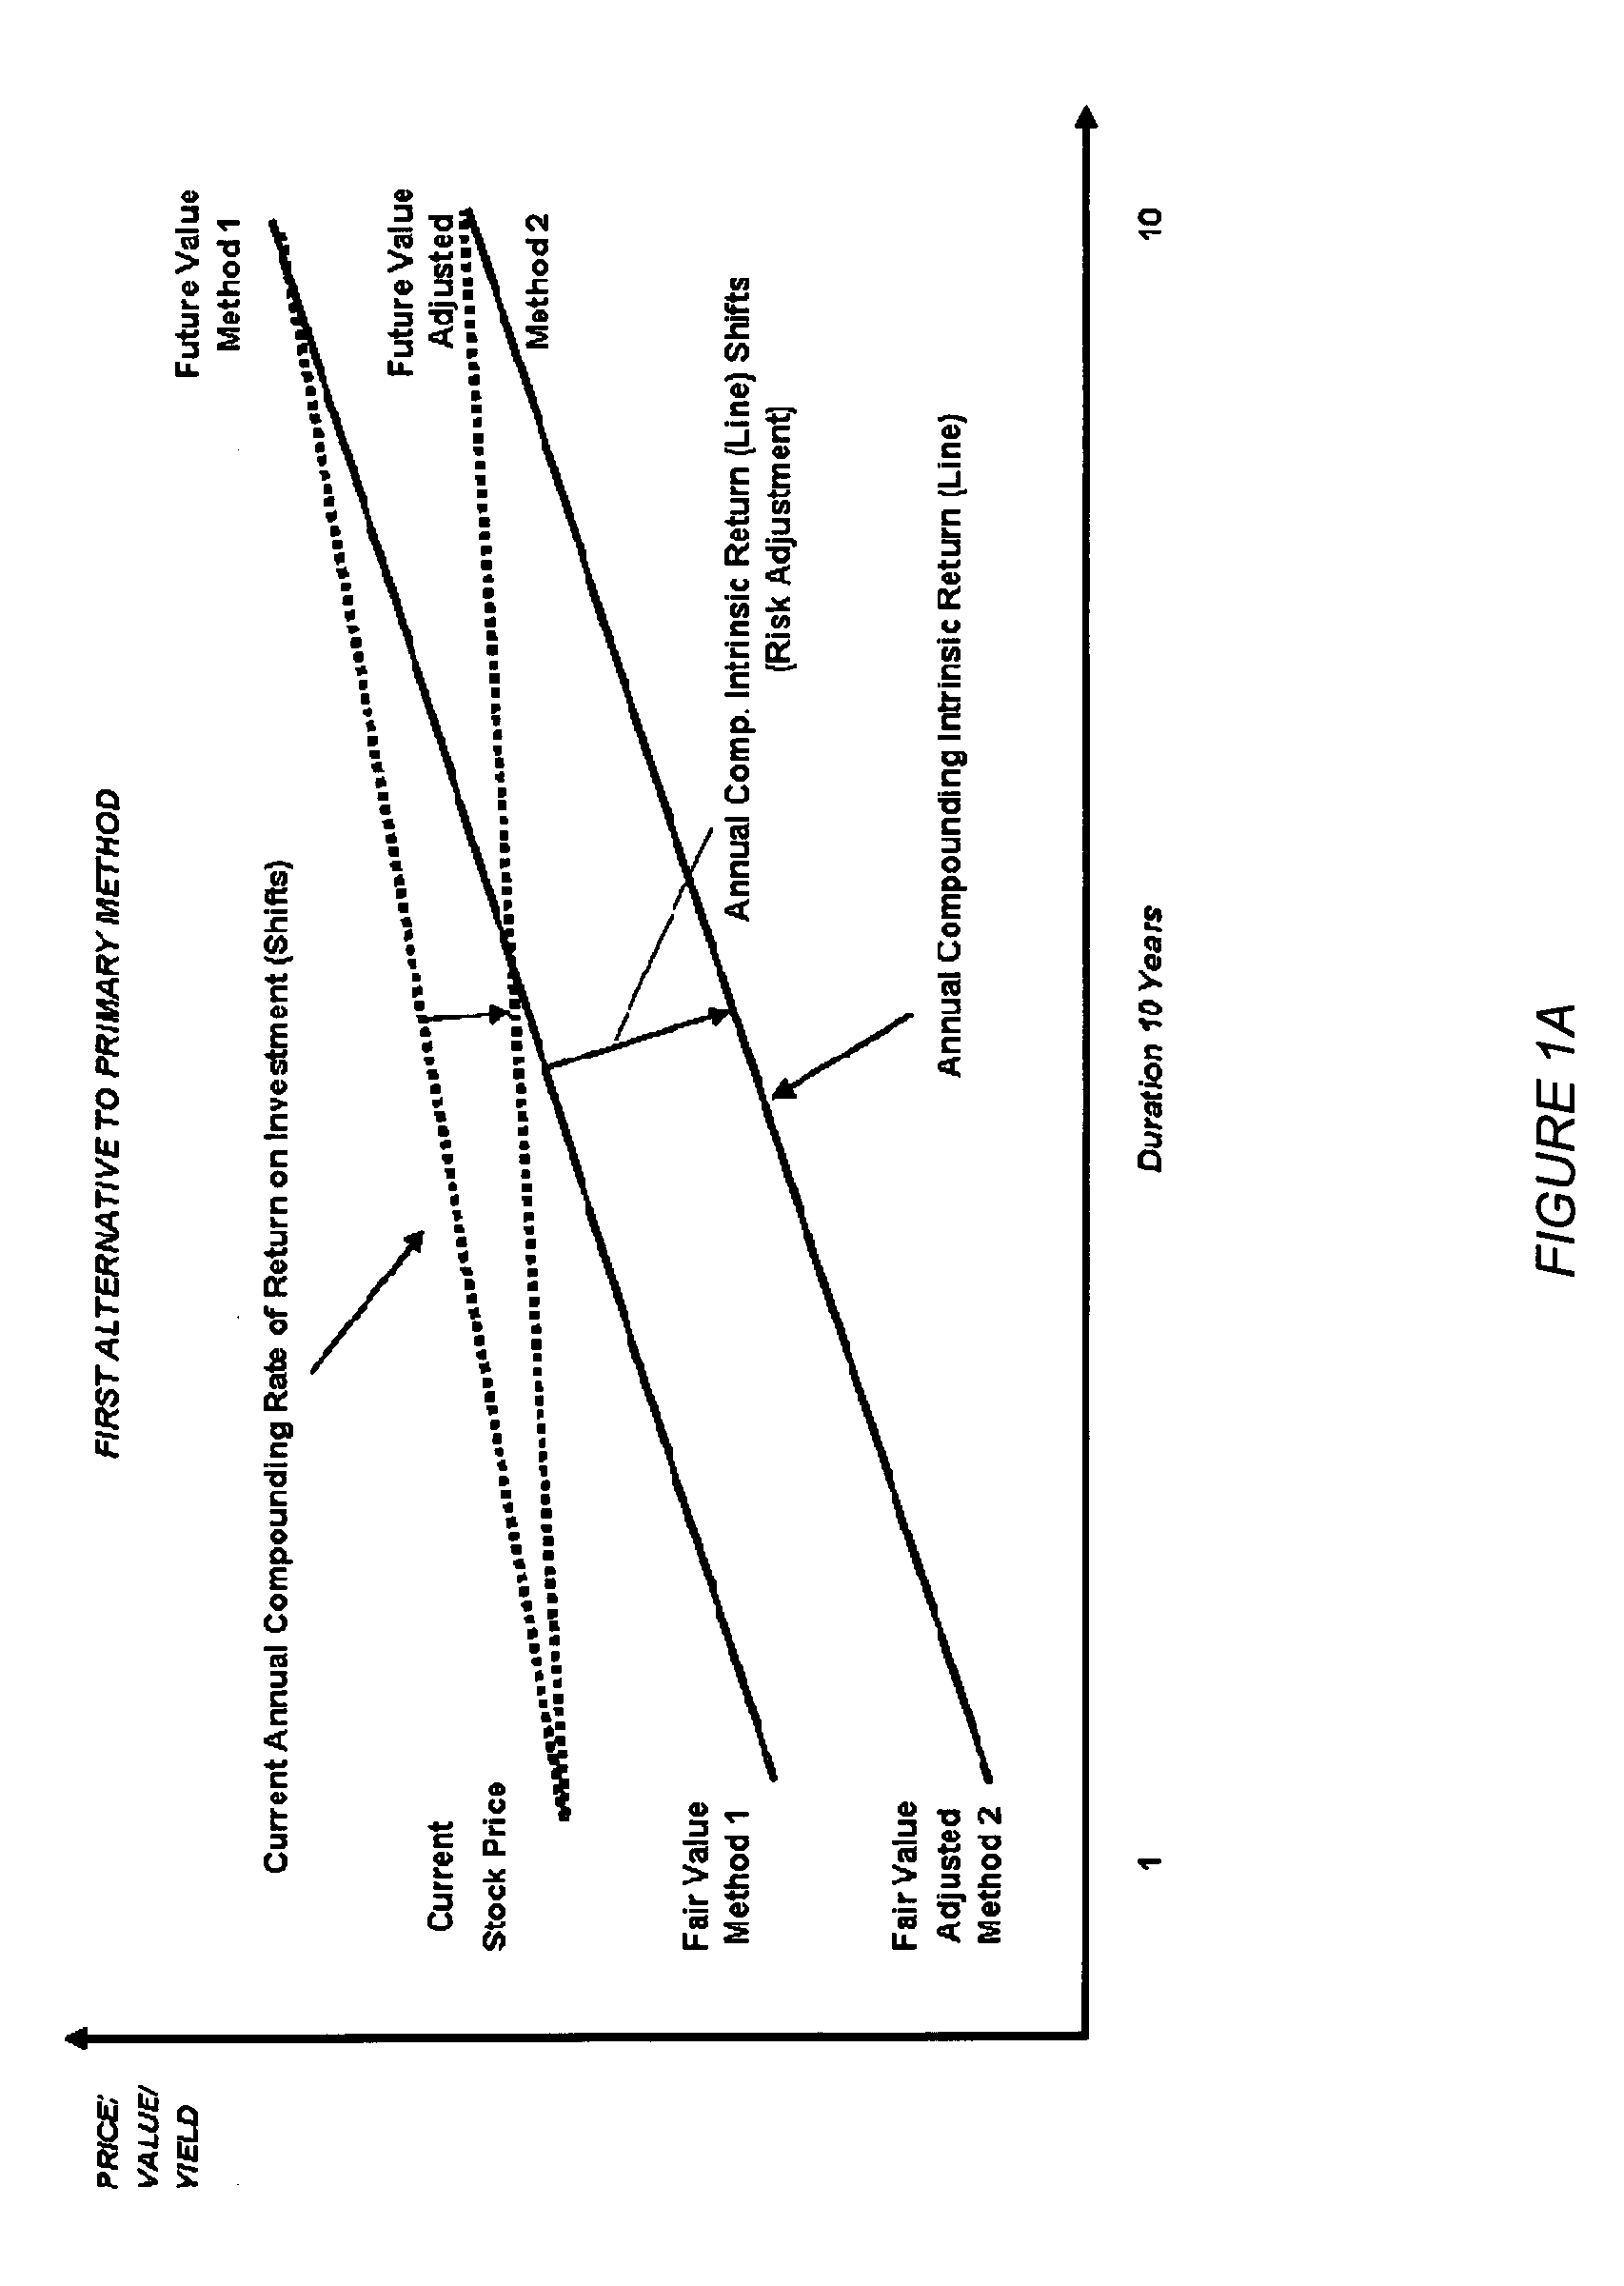 System and method for determining profitability of stock investments